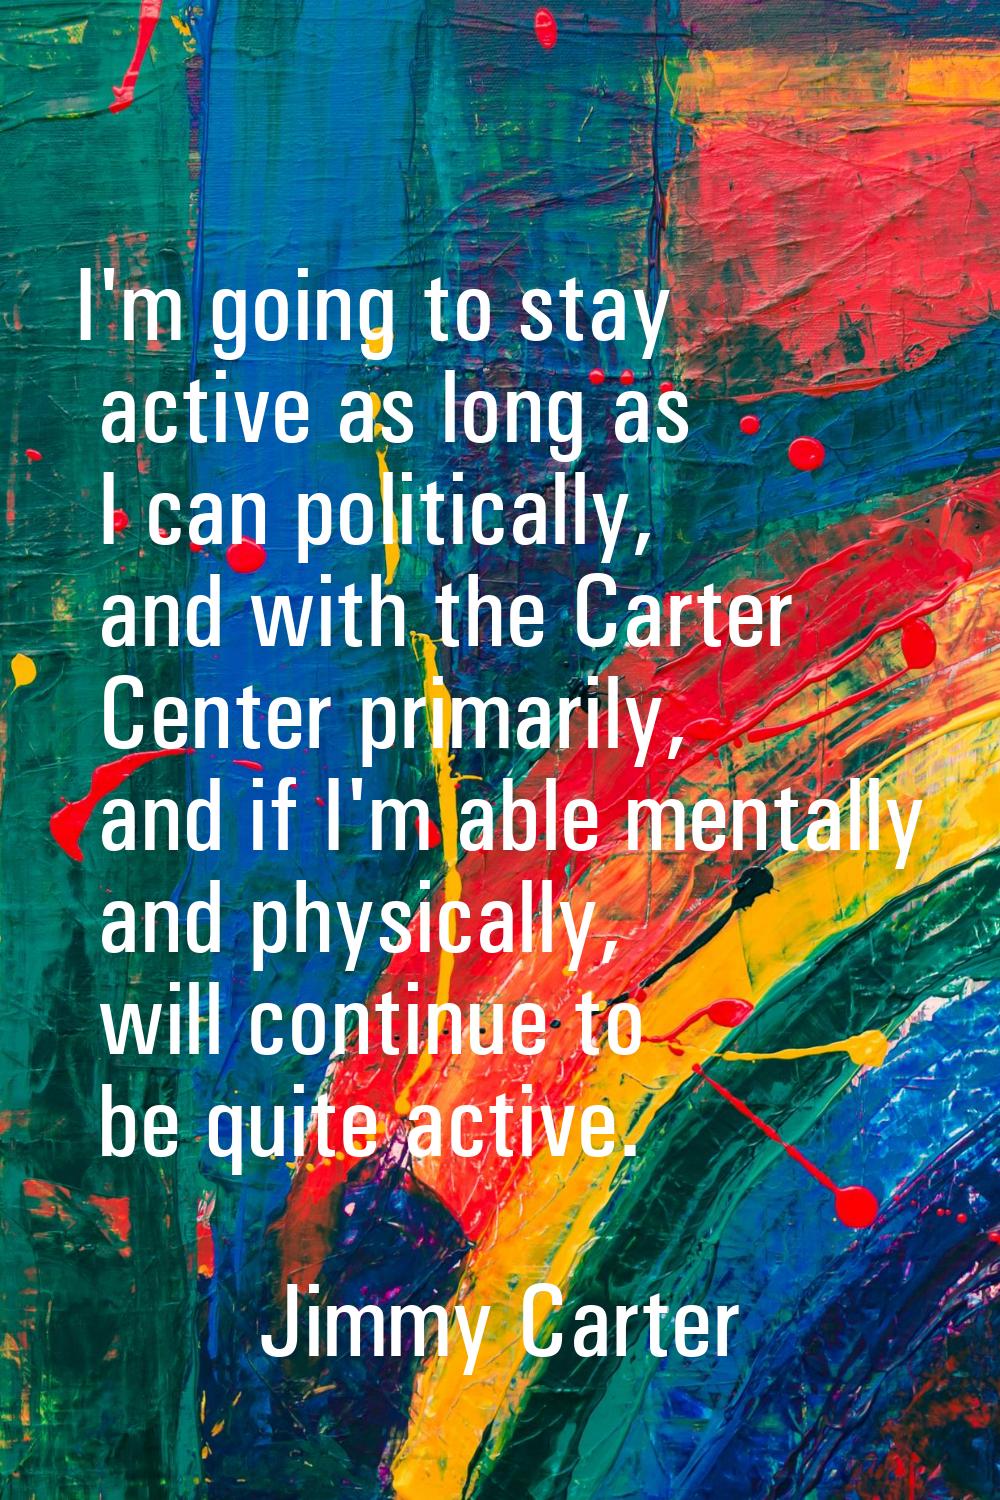 I'm going to stay active as long as I can politically, and with the Carter Center primarily, and if